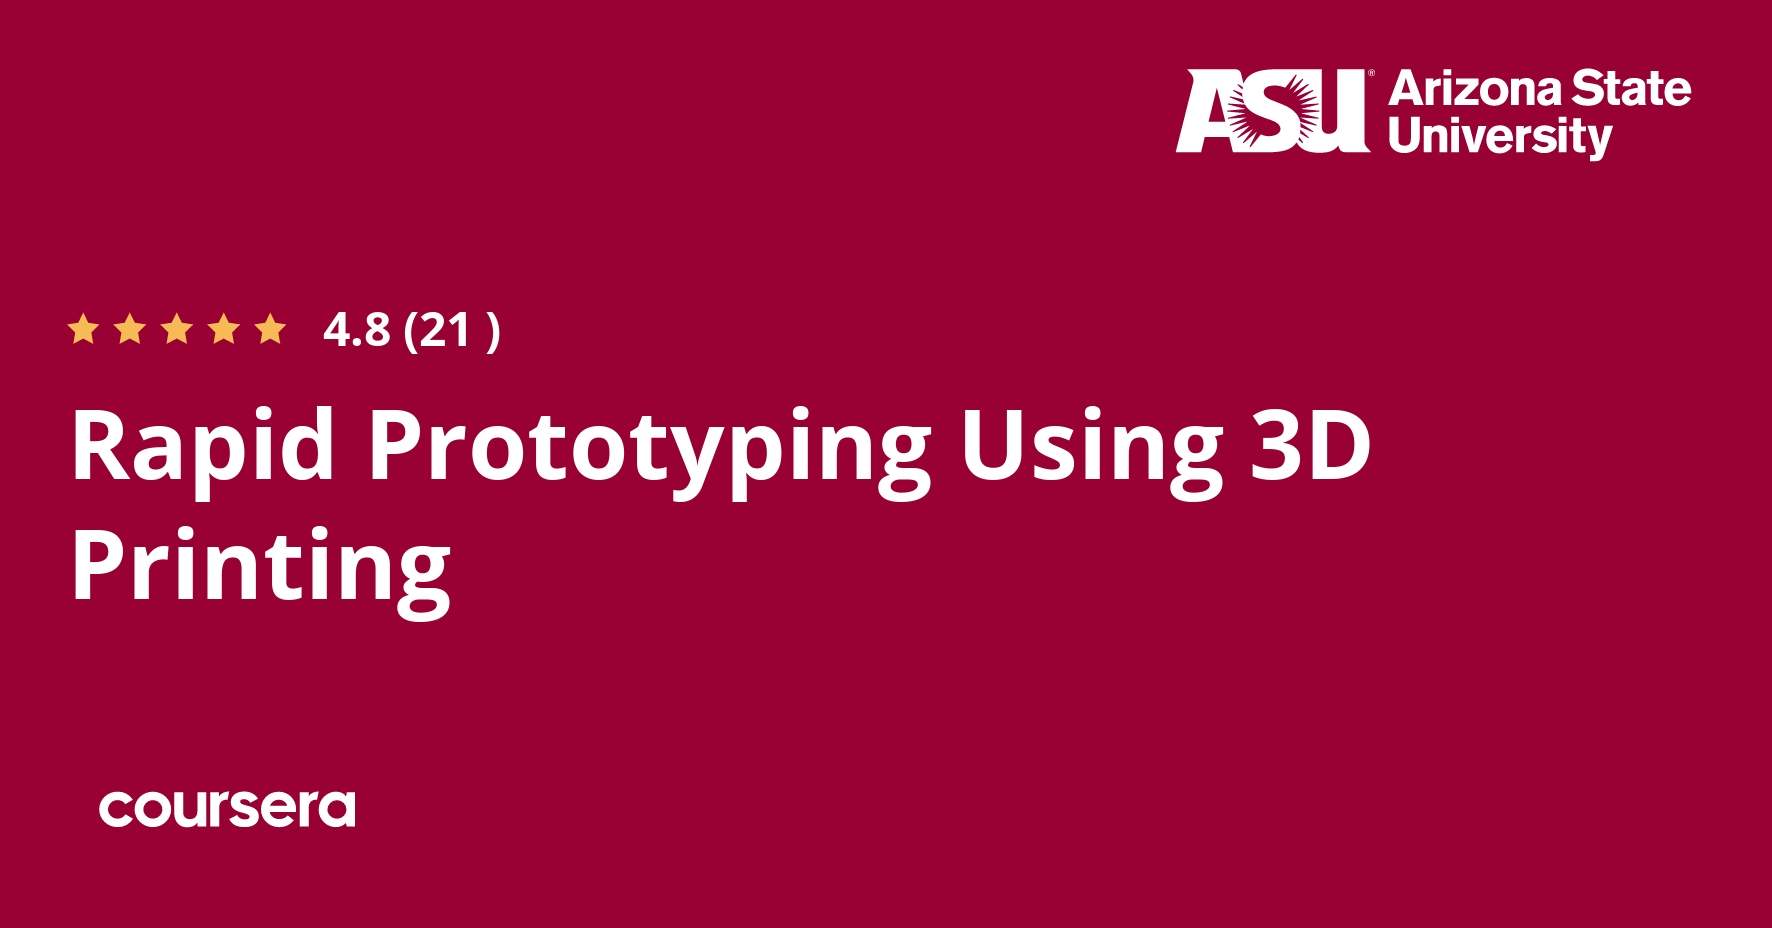 Offered by Arizona State University. Learn Prototyping in Engineering & Product Design. This specialization explores the use of 3D printing ... Enroll for free.